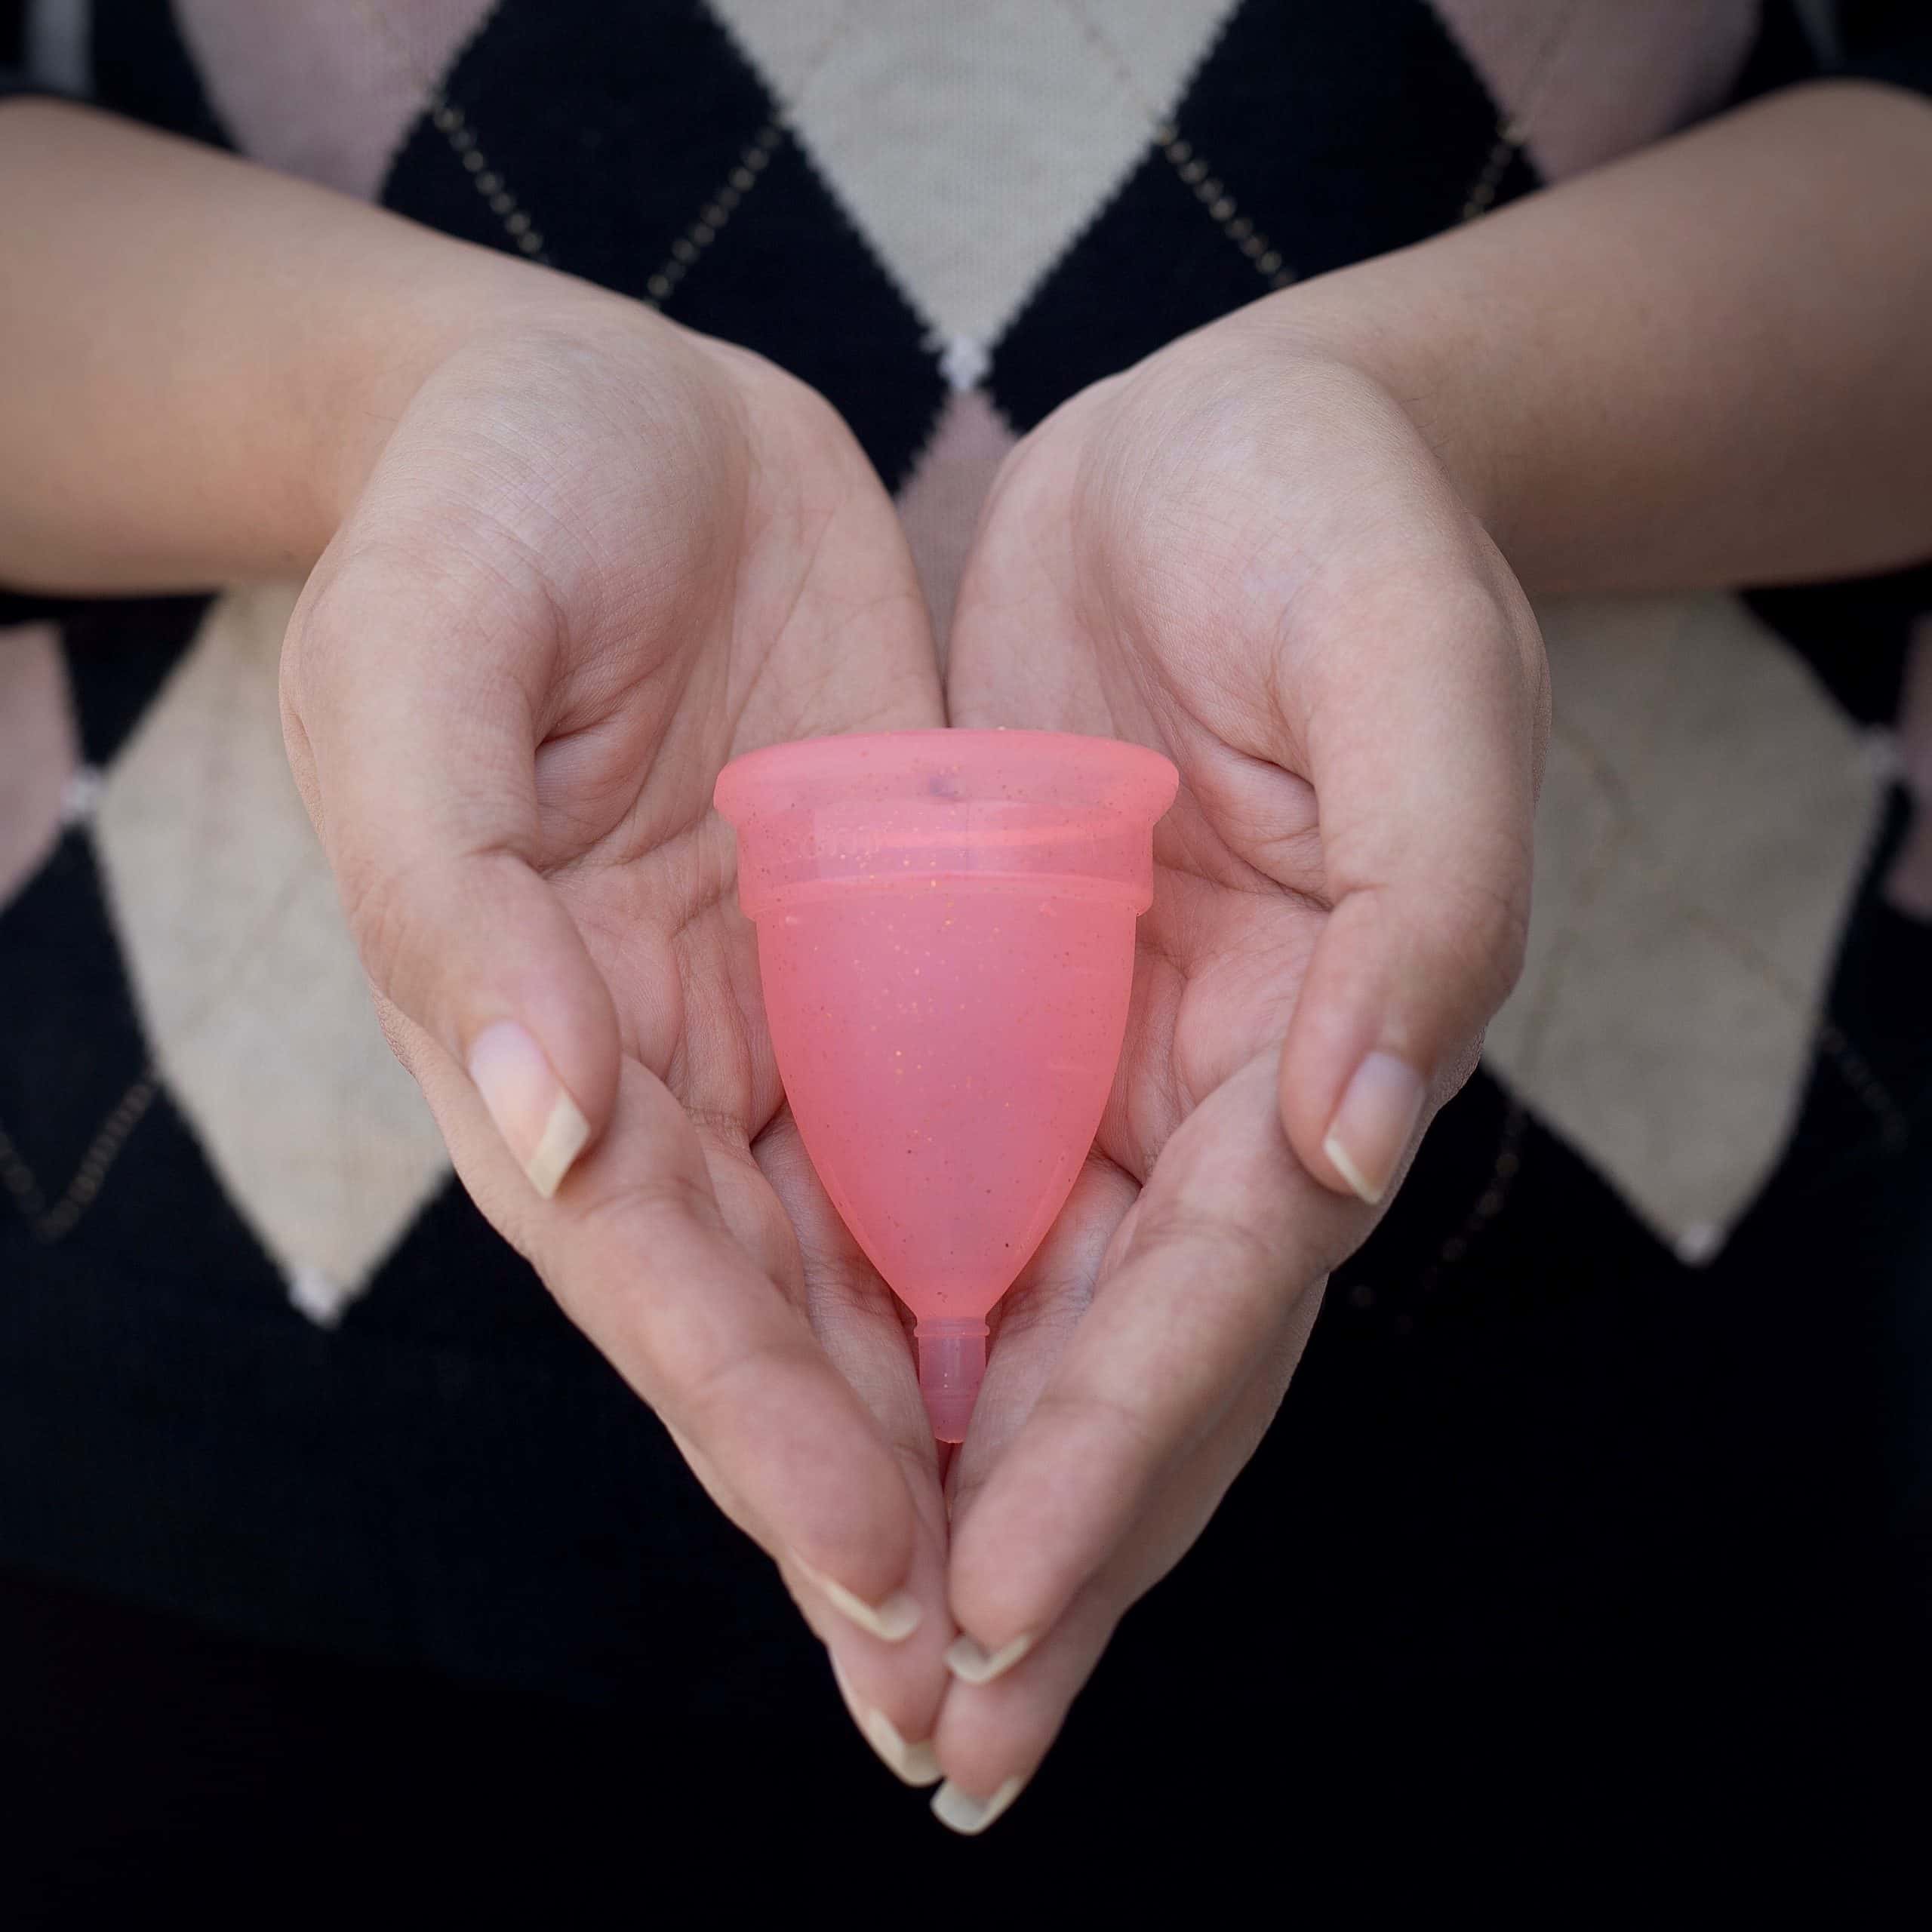 What is a Menstrual Cup? Menstural Cup Size and Uses - Shecup